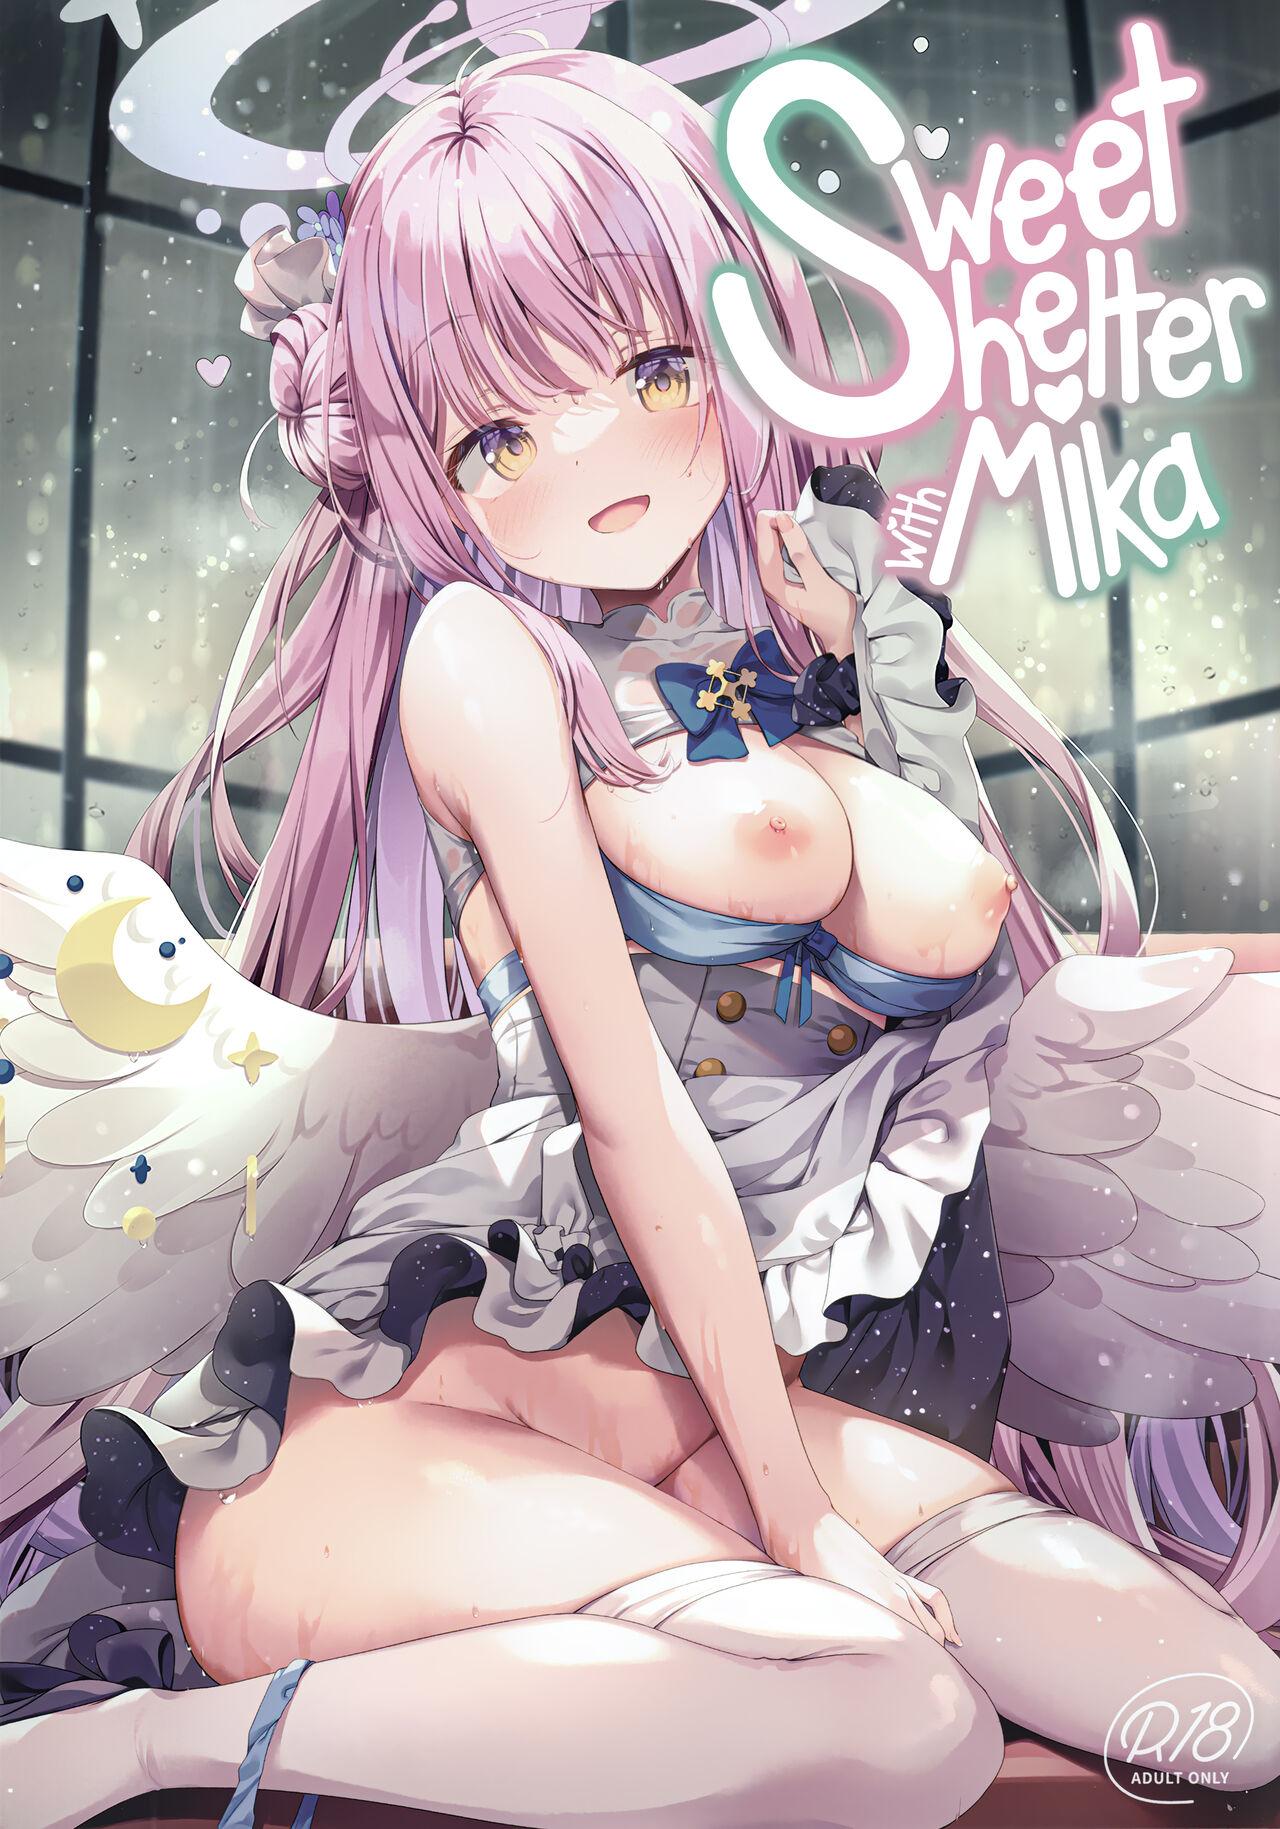 Petite Mika to Amayadori | Sweet Shelter with Mika - Blue archive Jacking - Picture 1